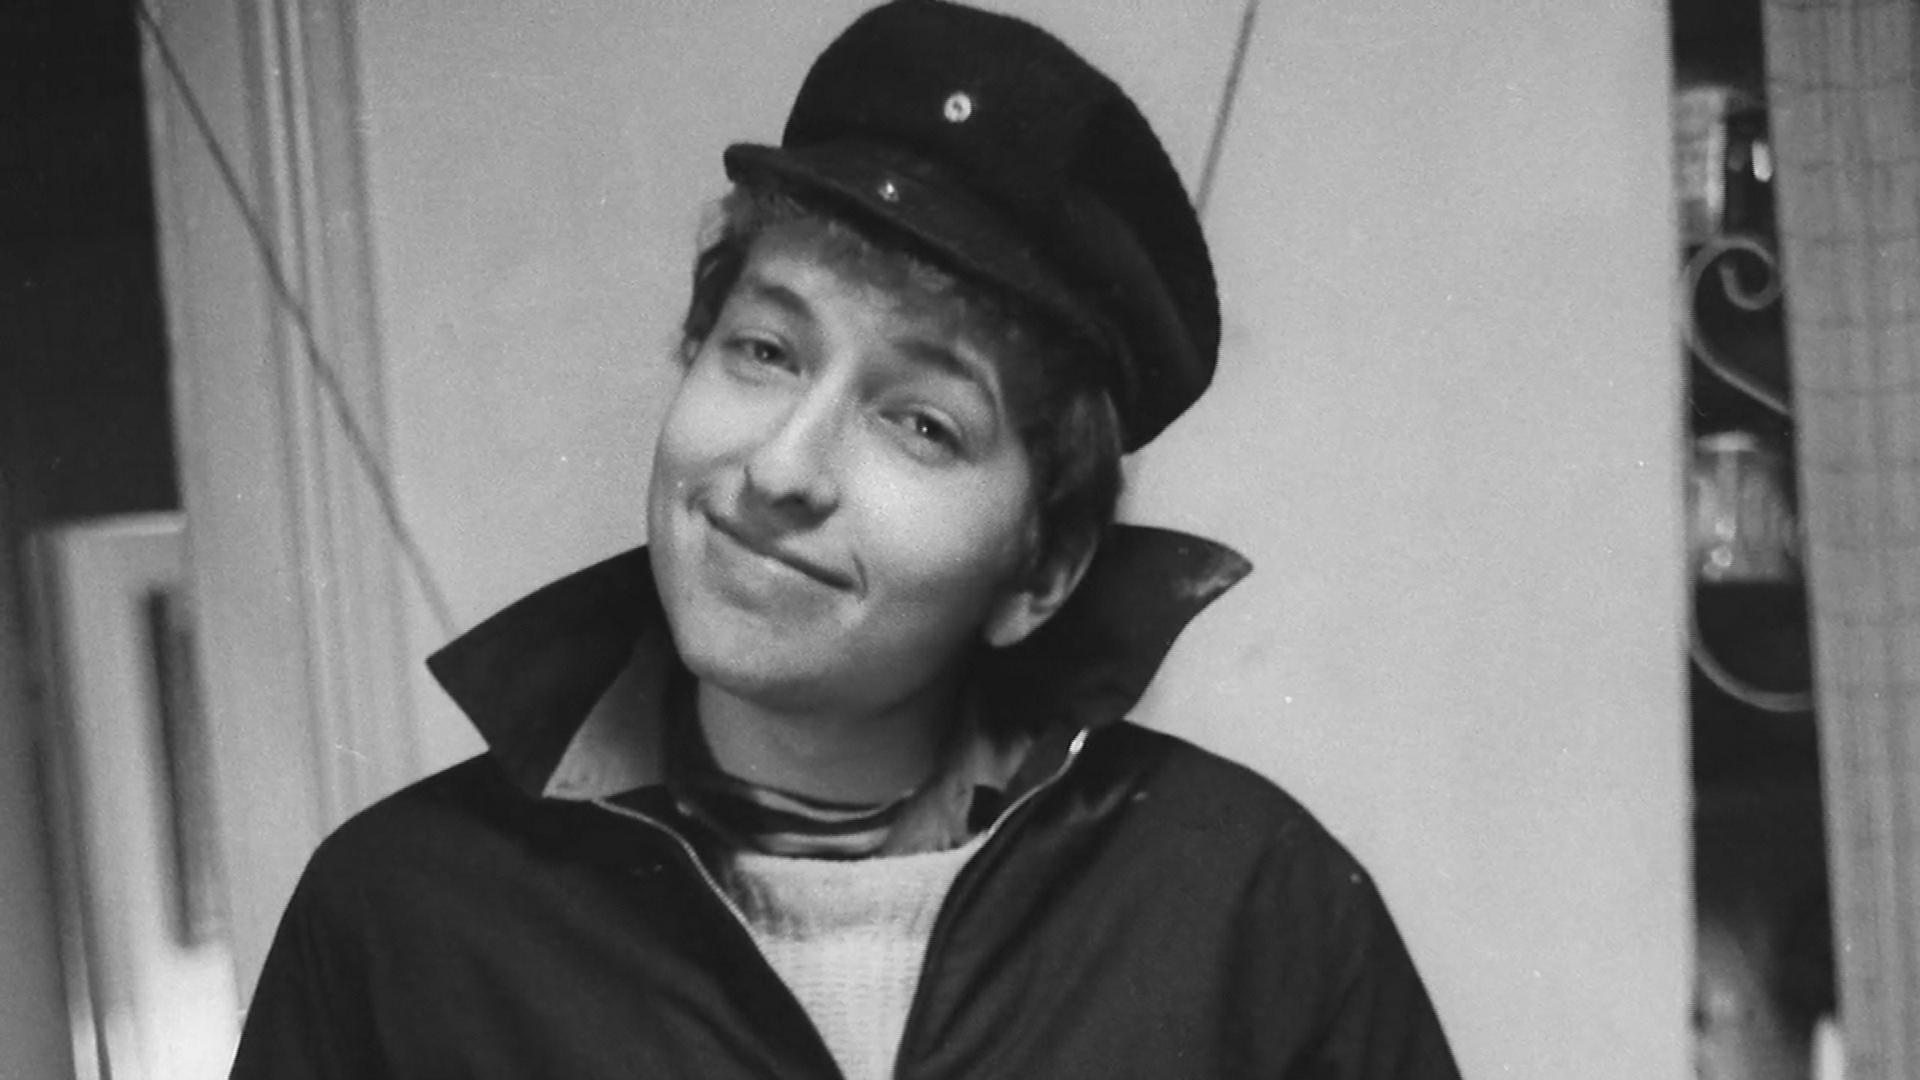 Photos of a young Bob Dylan seen for the first time - BBC News